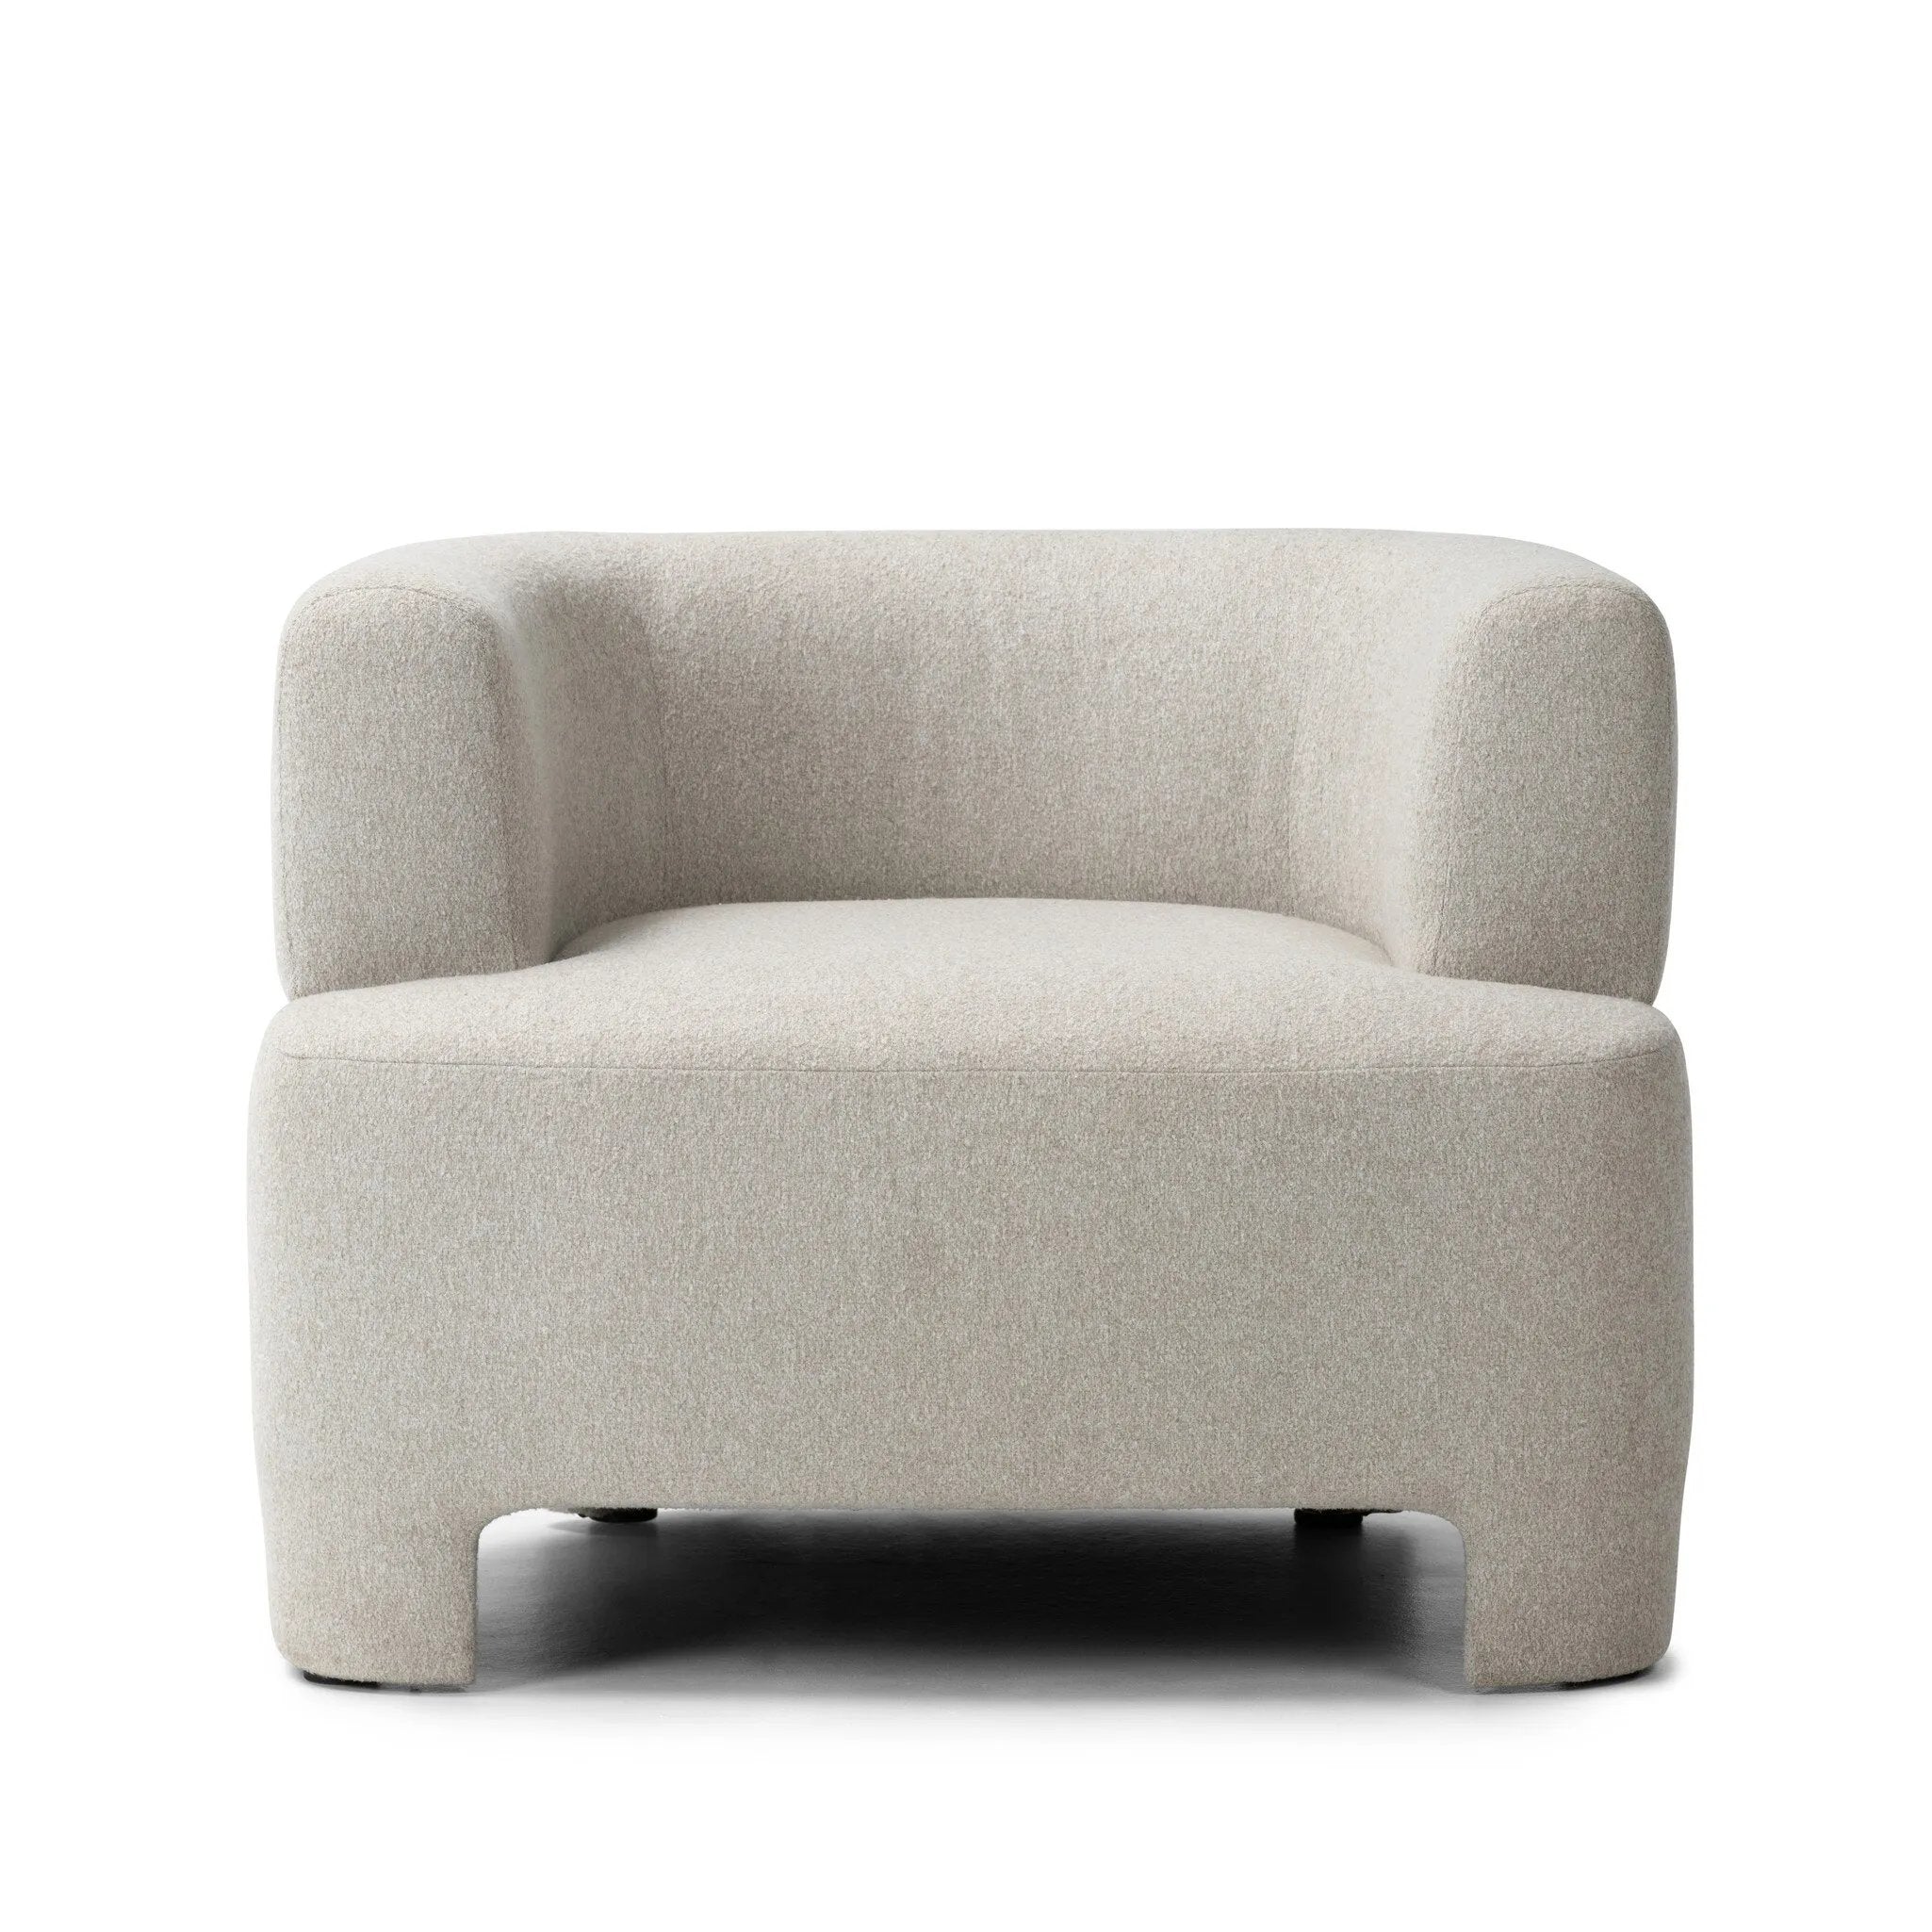 This contemporary wraparound chair melds two forms for a study in seamless balance. The seat's modern form is neutralized with an understated pebble color, while sleek cutouts emphasize the tri-leg base.Collection: Farro Amethyst Home provides interior design, new home construction design consulting, vintage area rugs, and lighting in the Salt Lake City metro area.